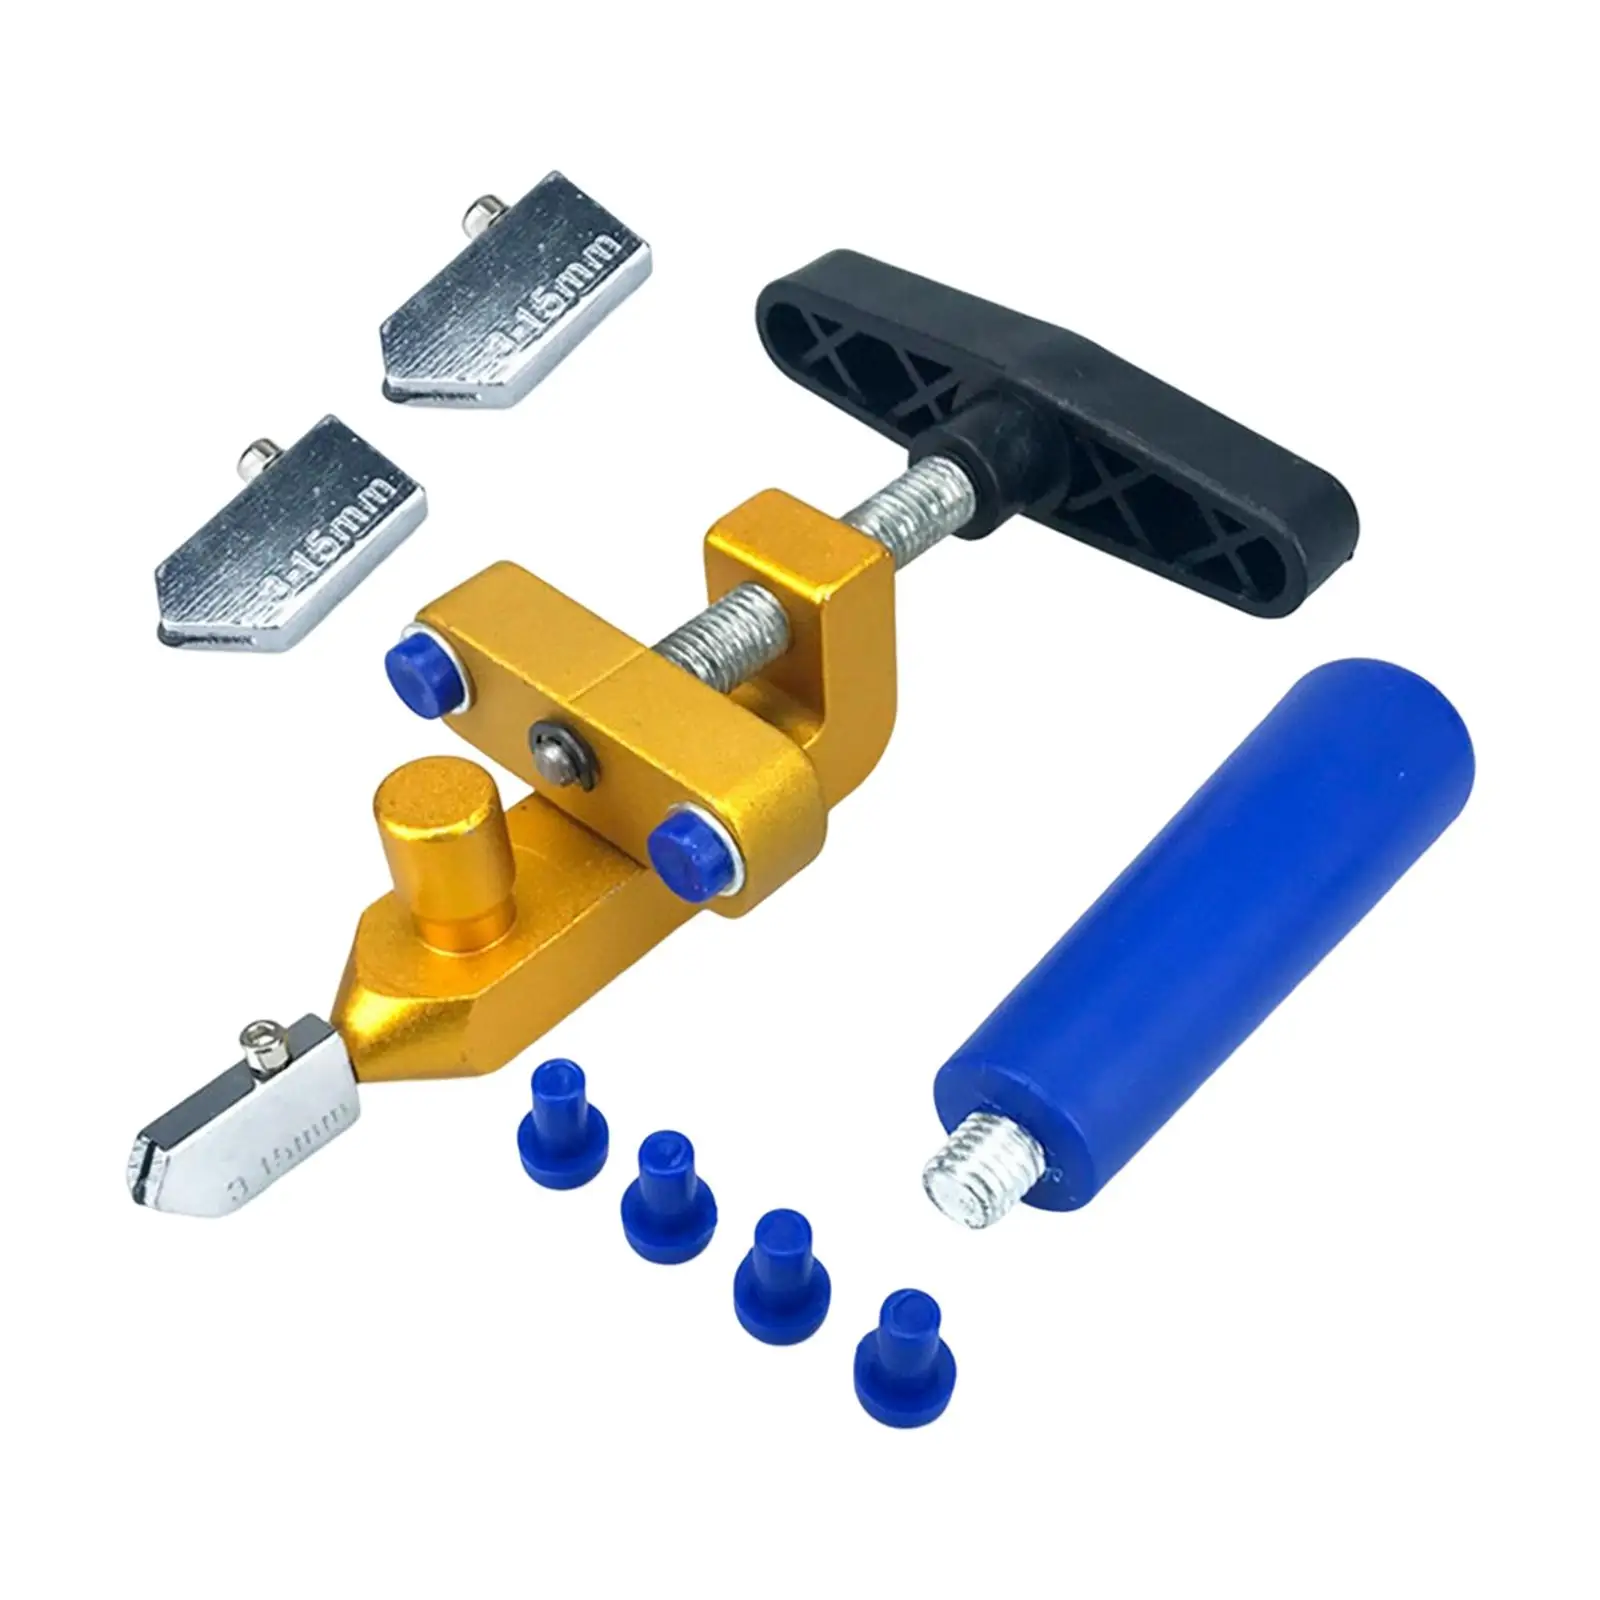 Manual Ceramic Tile Opener Lightweight Construction Tool Cutting Machine Hand Tools Portable Glass Cutter for Thick Glass